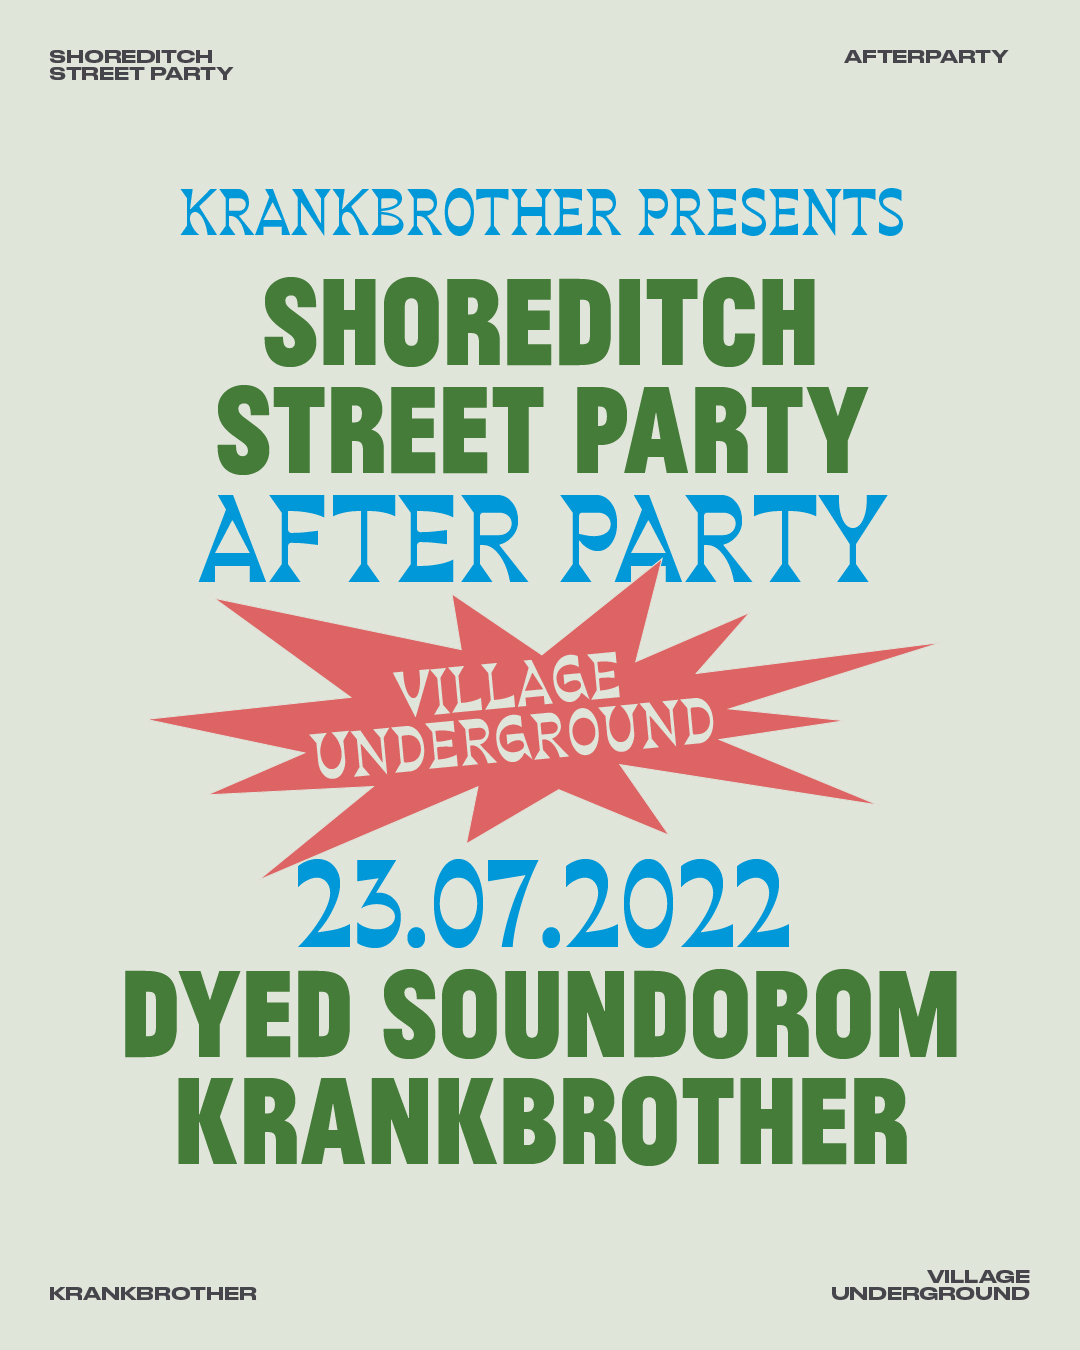 krankbrother presents: Shoreditch Street Party After Party - Flyer front